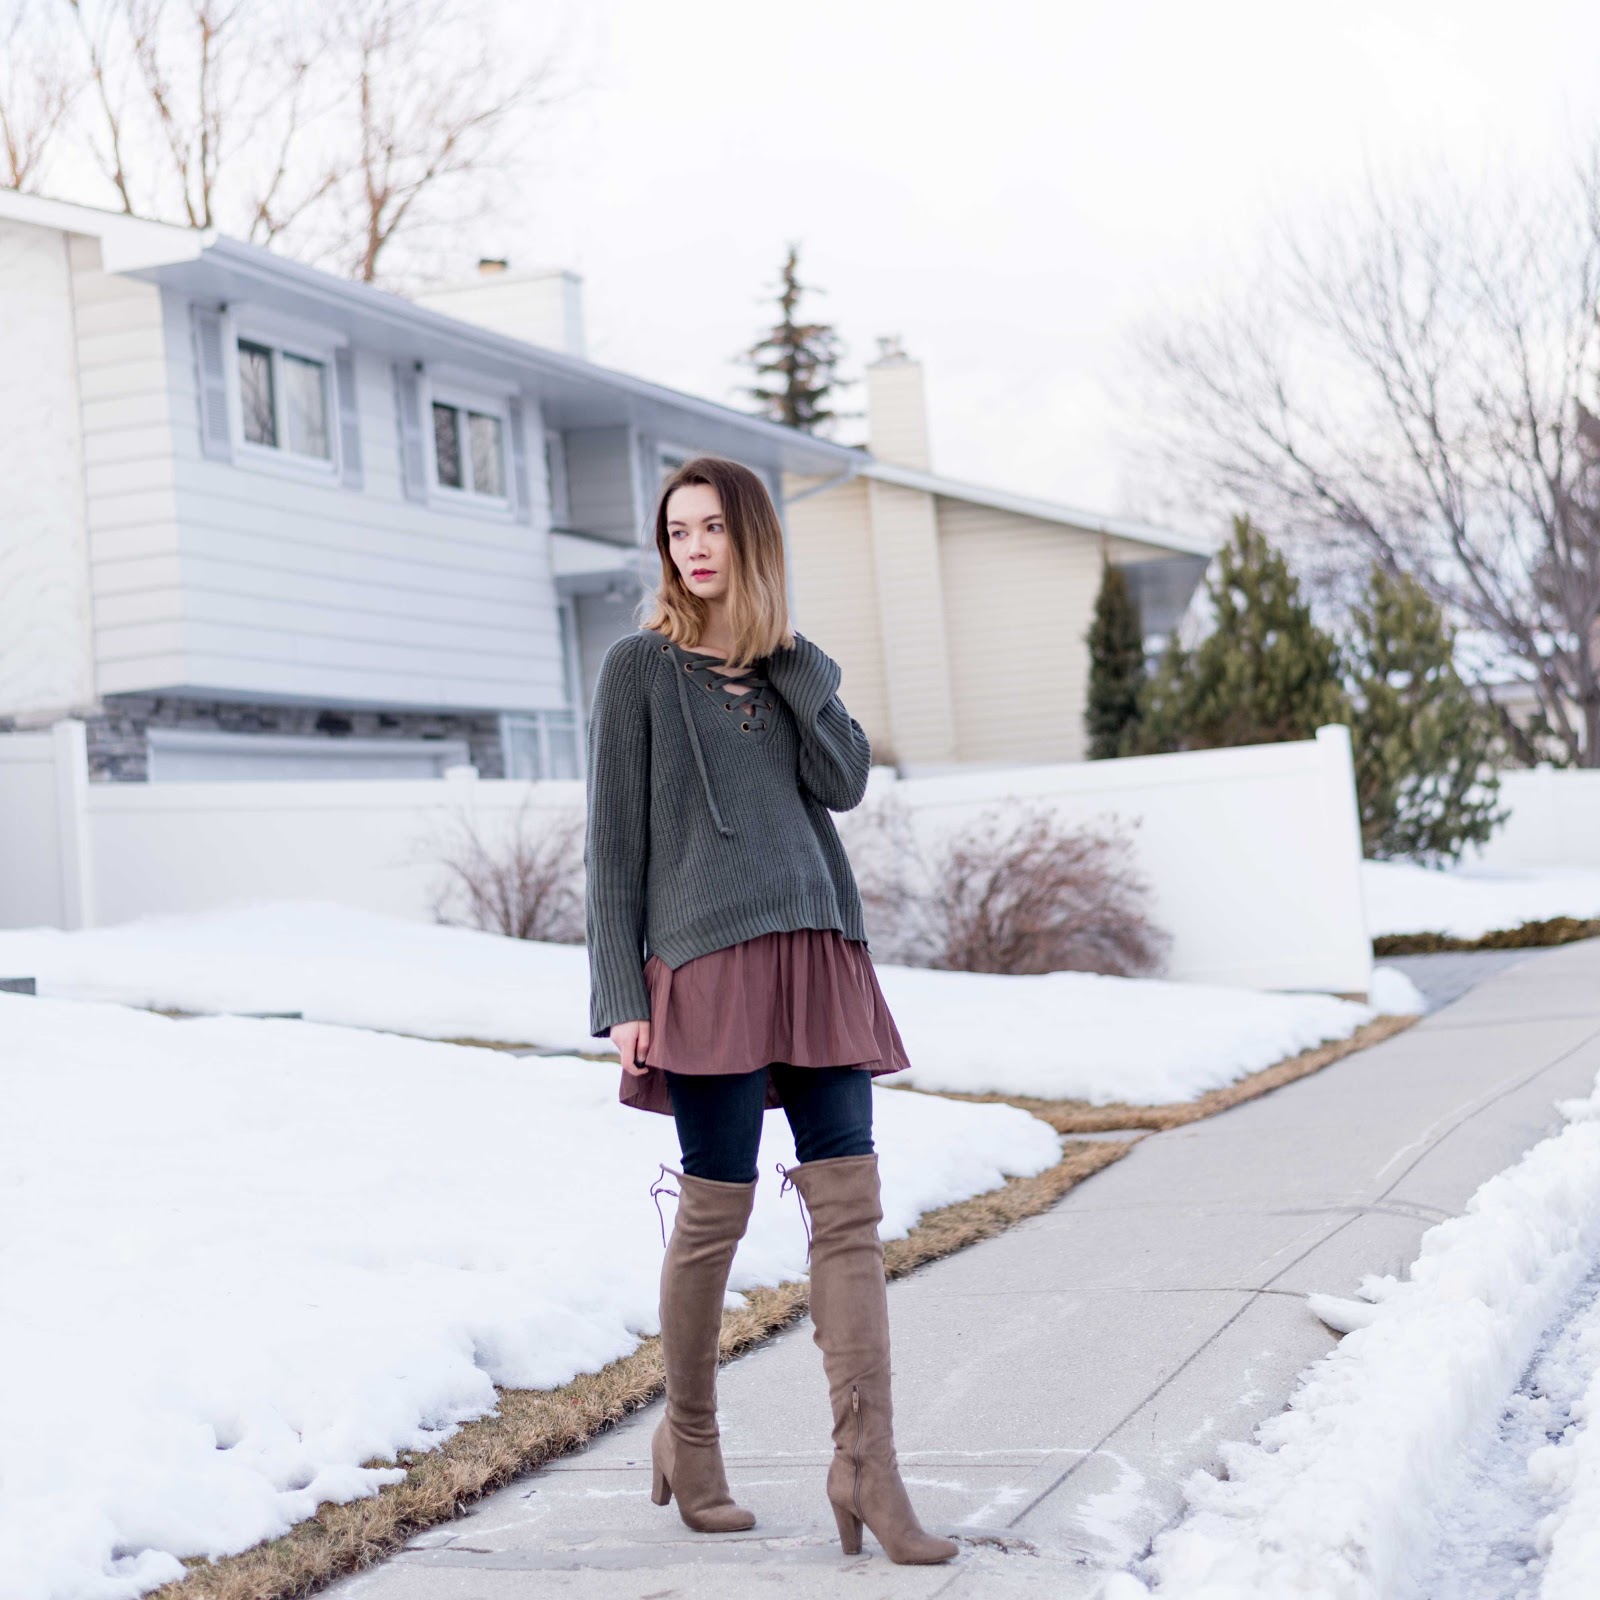 zaful review, lace up sweater, lace up top, over the knee boots, jbrand, aritzia dress, winter fashion, calgary fashion, how to layer